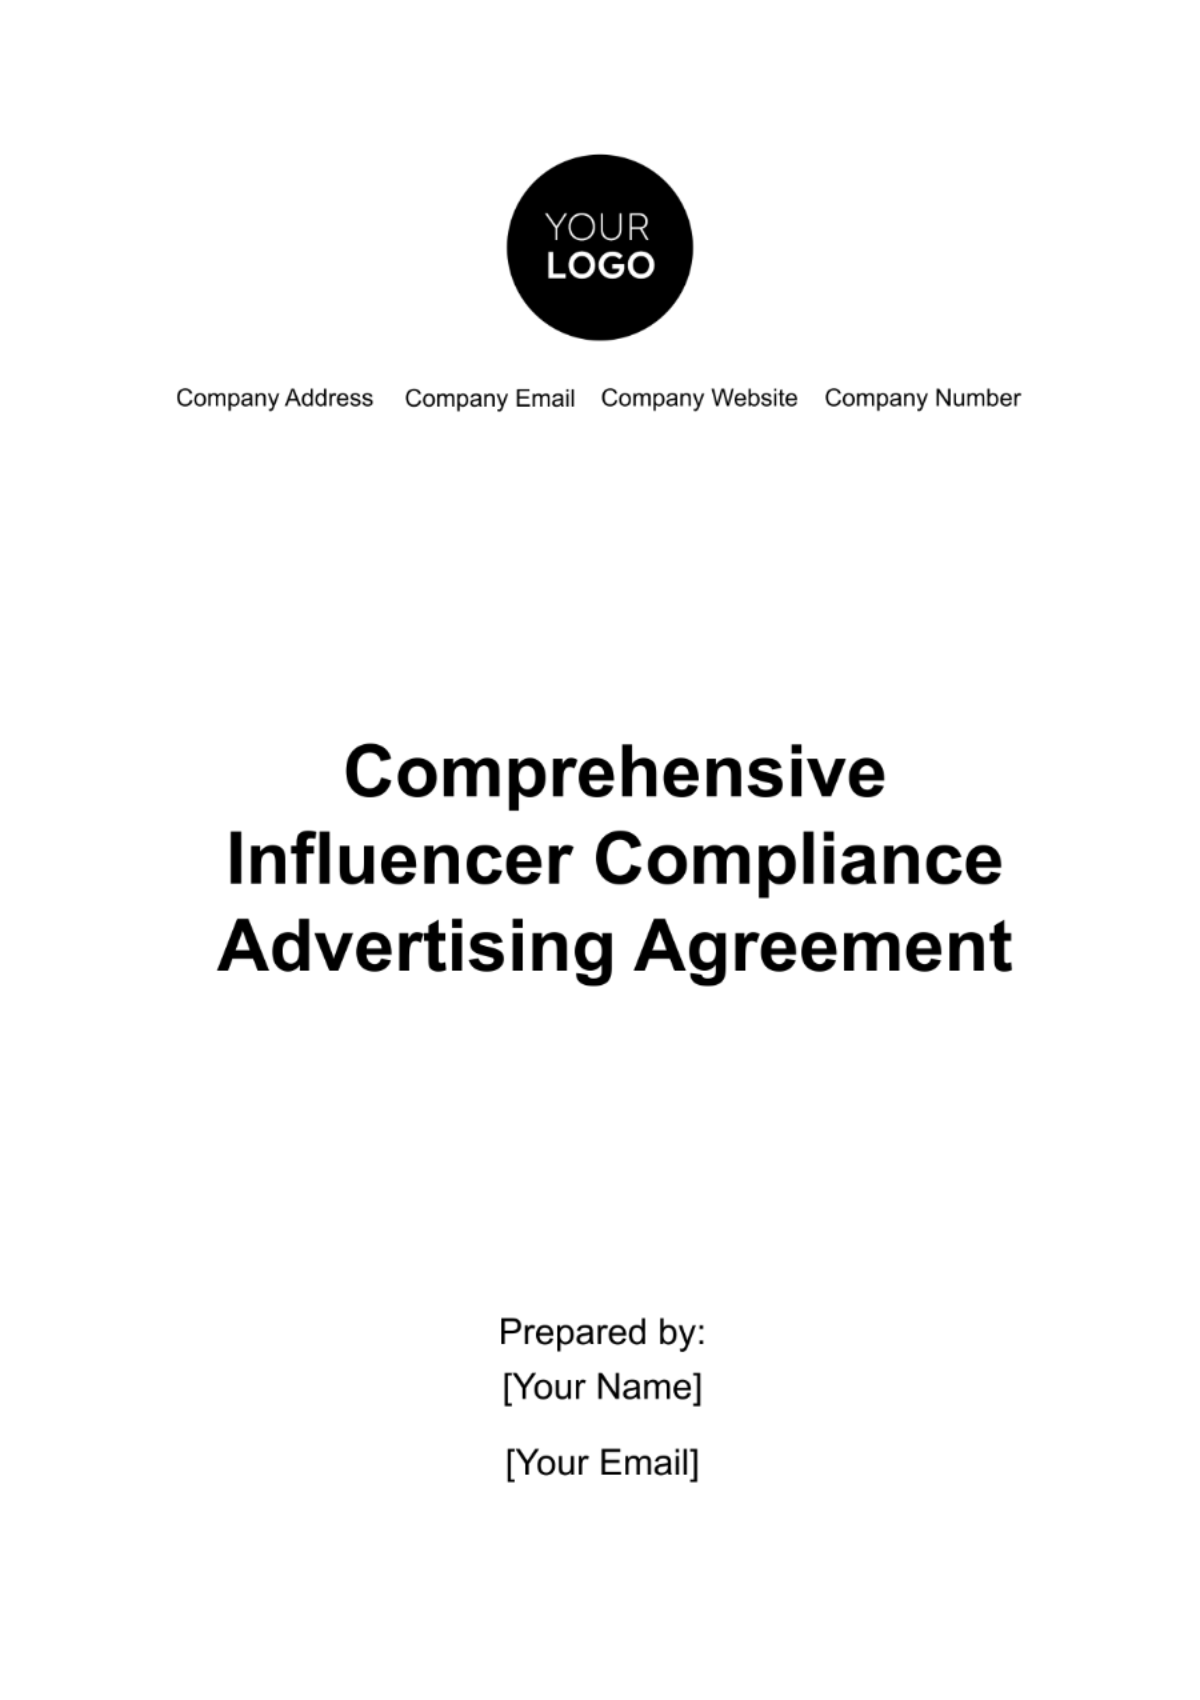 Free Comprehensive Influencer Compliance Advertising Agreement Template